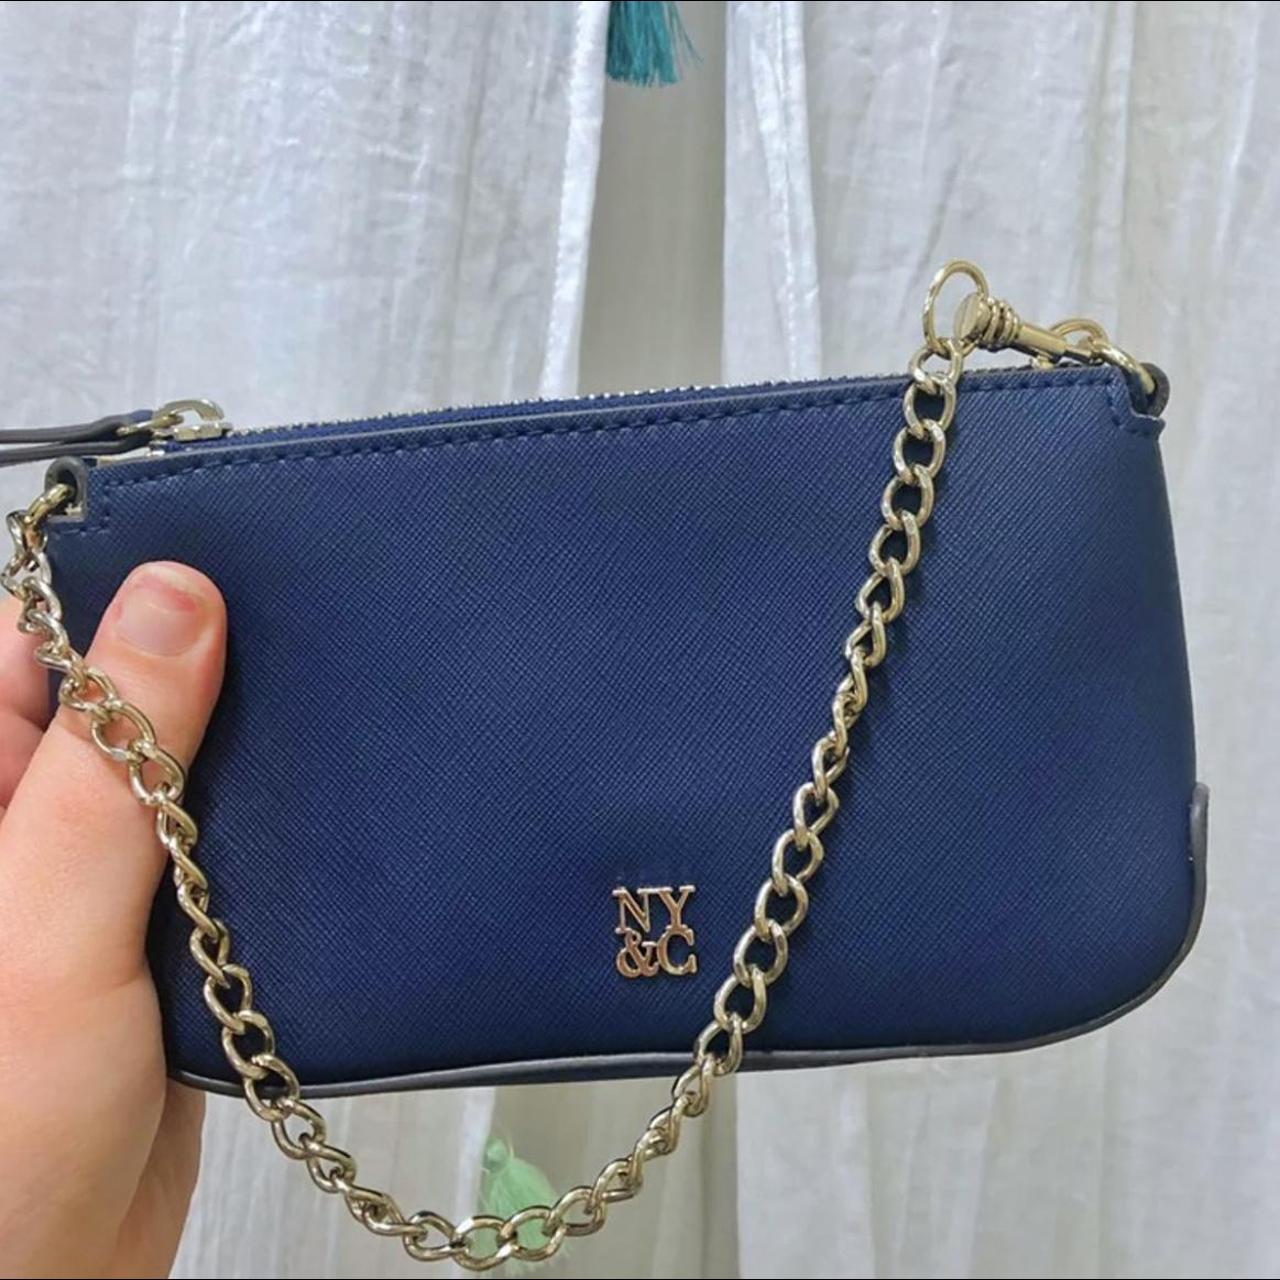 y2k New York & Company baguette bag with chain - Depop